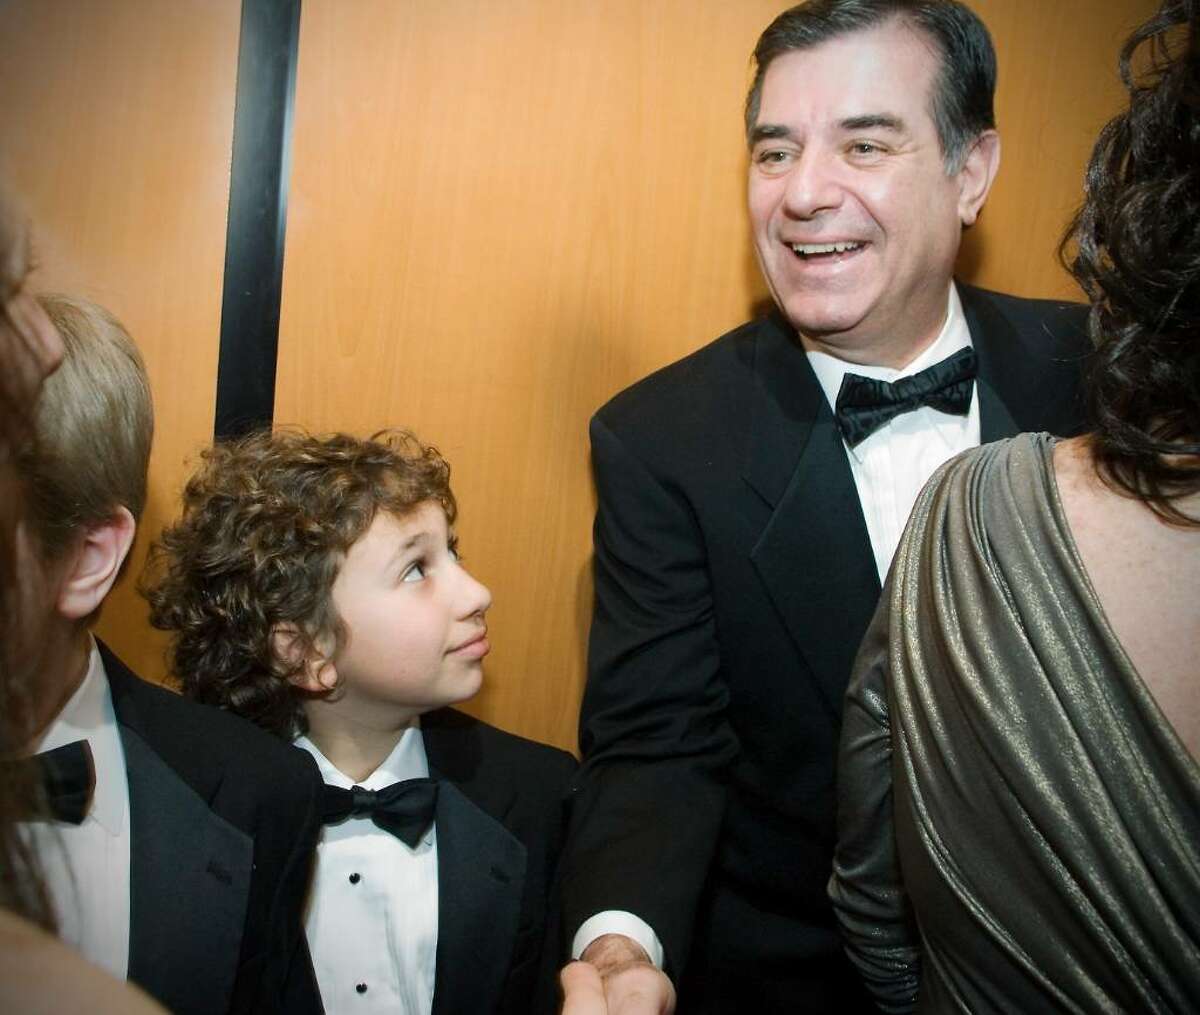 Mayor Pavia greets guests in the elevator as Evan Hyman, 10 of Stamford, jumps in for the ride at "A Thousand Stars Shine Together", A Gala Inaugural Celebration at The Palace Theater in Stamford, Conn. on Friday, January 15, 2009.